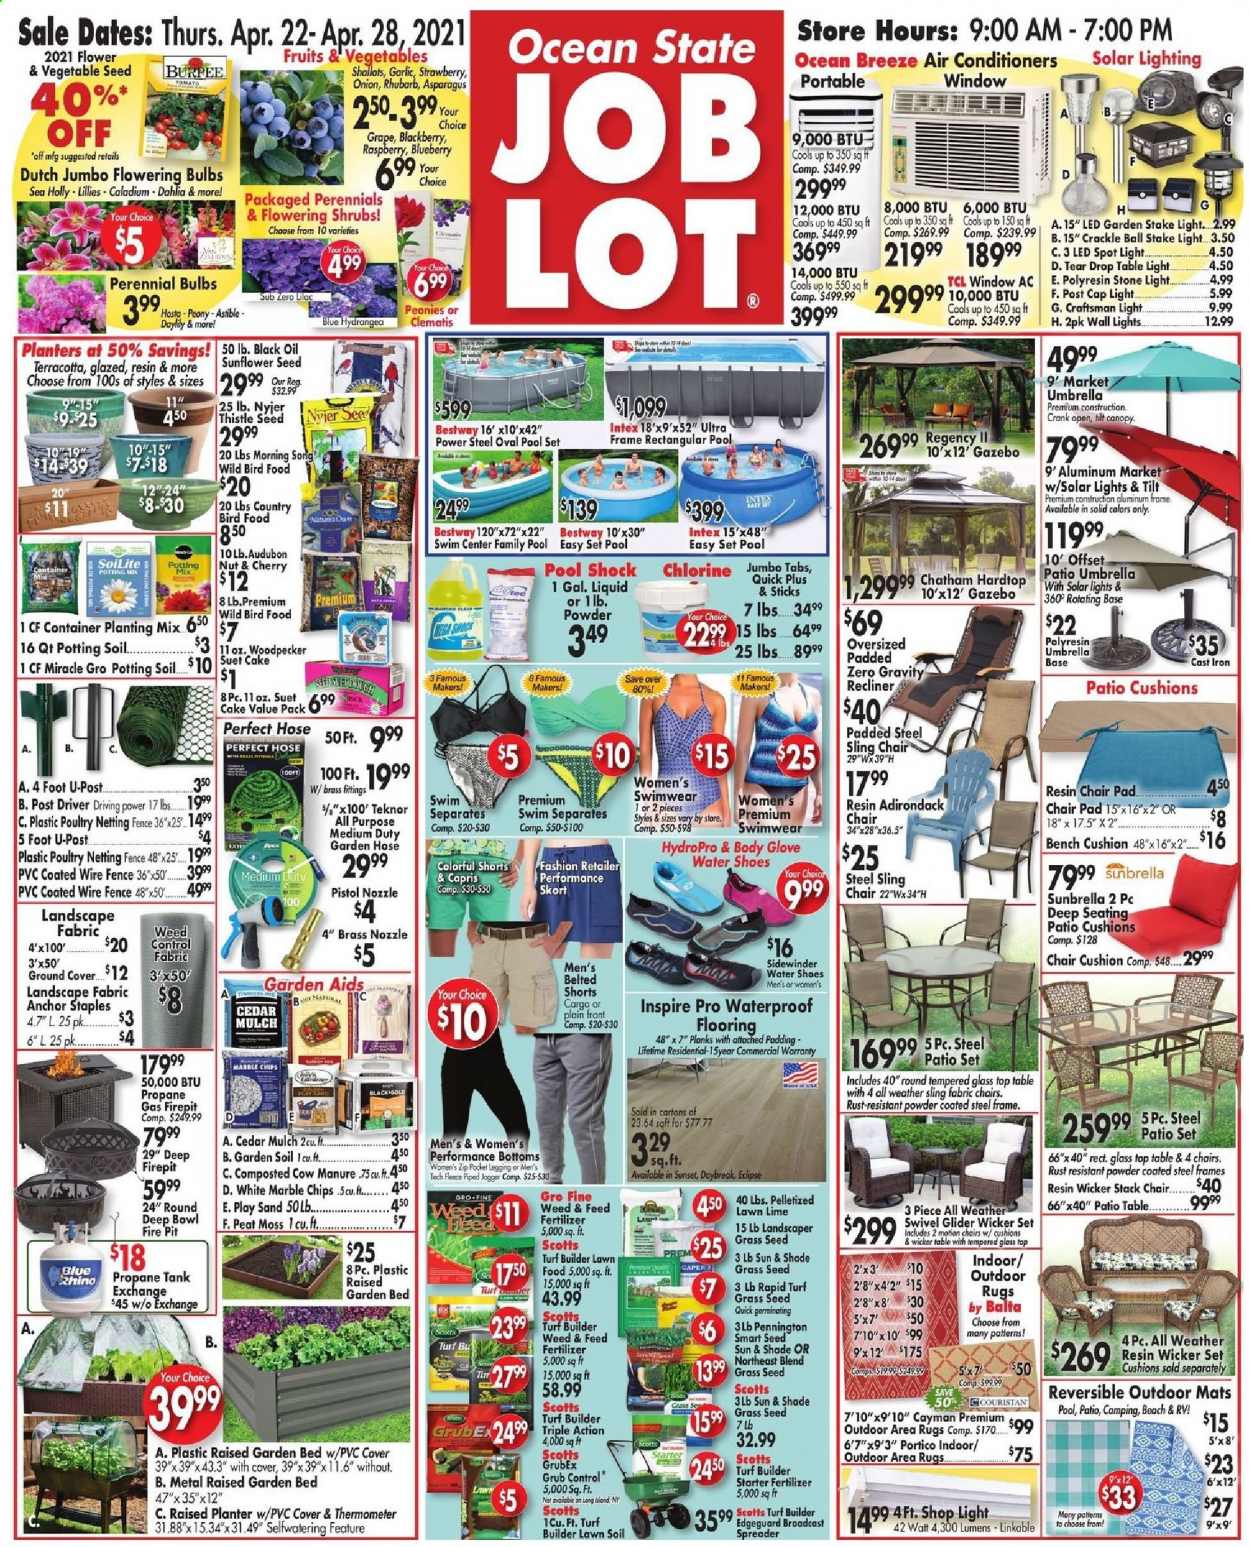 thumbnail - Ocean State Job Lot Flyer - 04/22/2021 - 04/28/2021 - Sales products - shoes, oil, thermometer, bowl, spotlight, bench cushion, chair pad, cushion, tank, animal food, bird food, suet, TCL, Anchor, air conditioner, cap, gloves, umbrella, shorts, swimming suit, pistol, shop light, rug, area rug, Craftsman, spreader, propane tank, gazebo, pool, Intex, asparagus, plant seeds, potting mix, fertilizer, turf builder, garden soil, garden stake, garden hose, grass seed, garden mulch, Eclipse. Page 1.